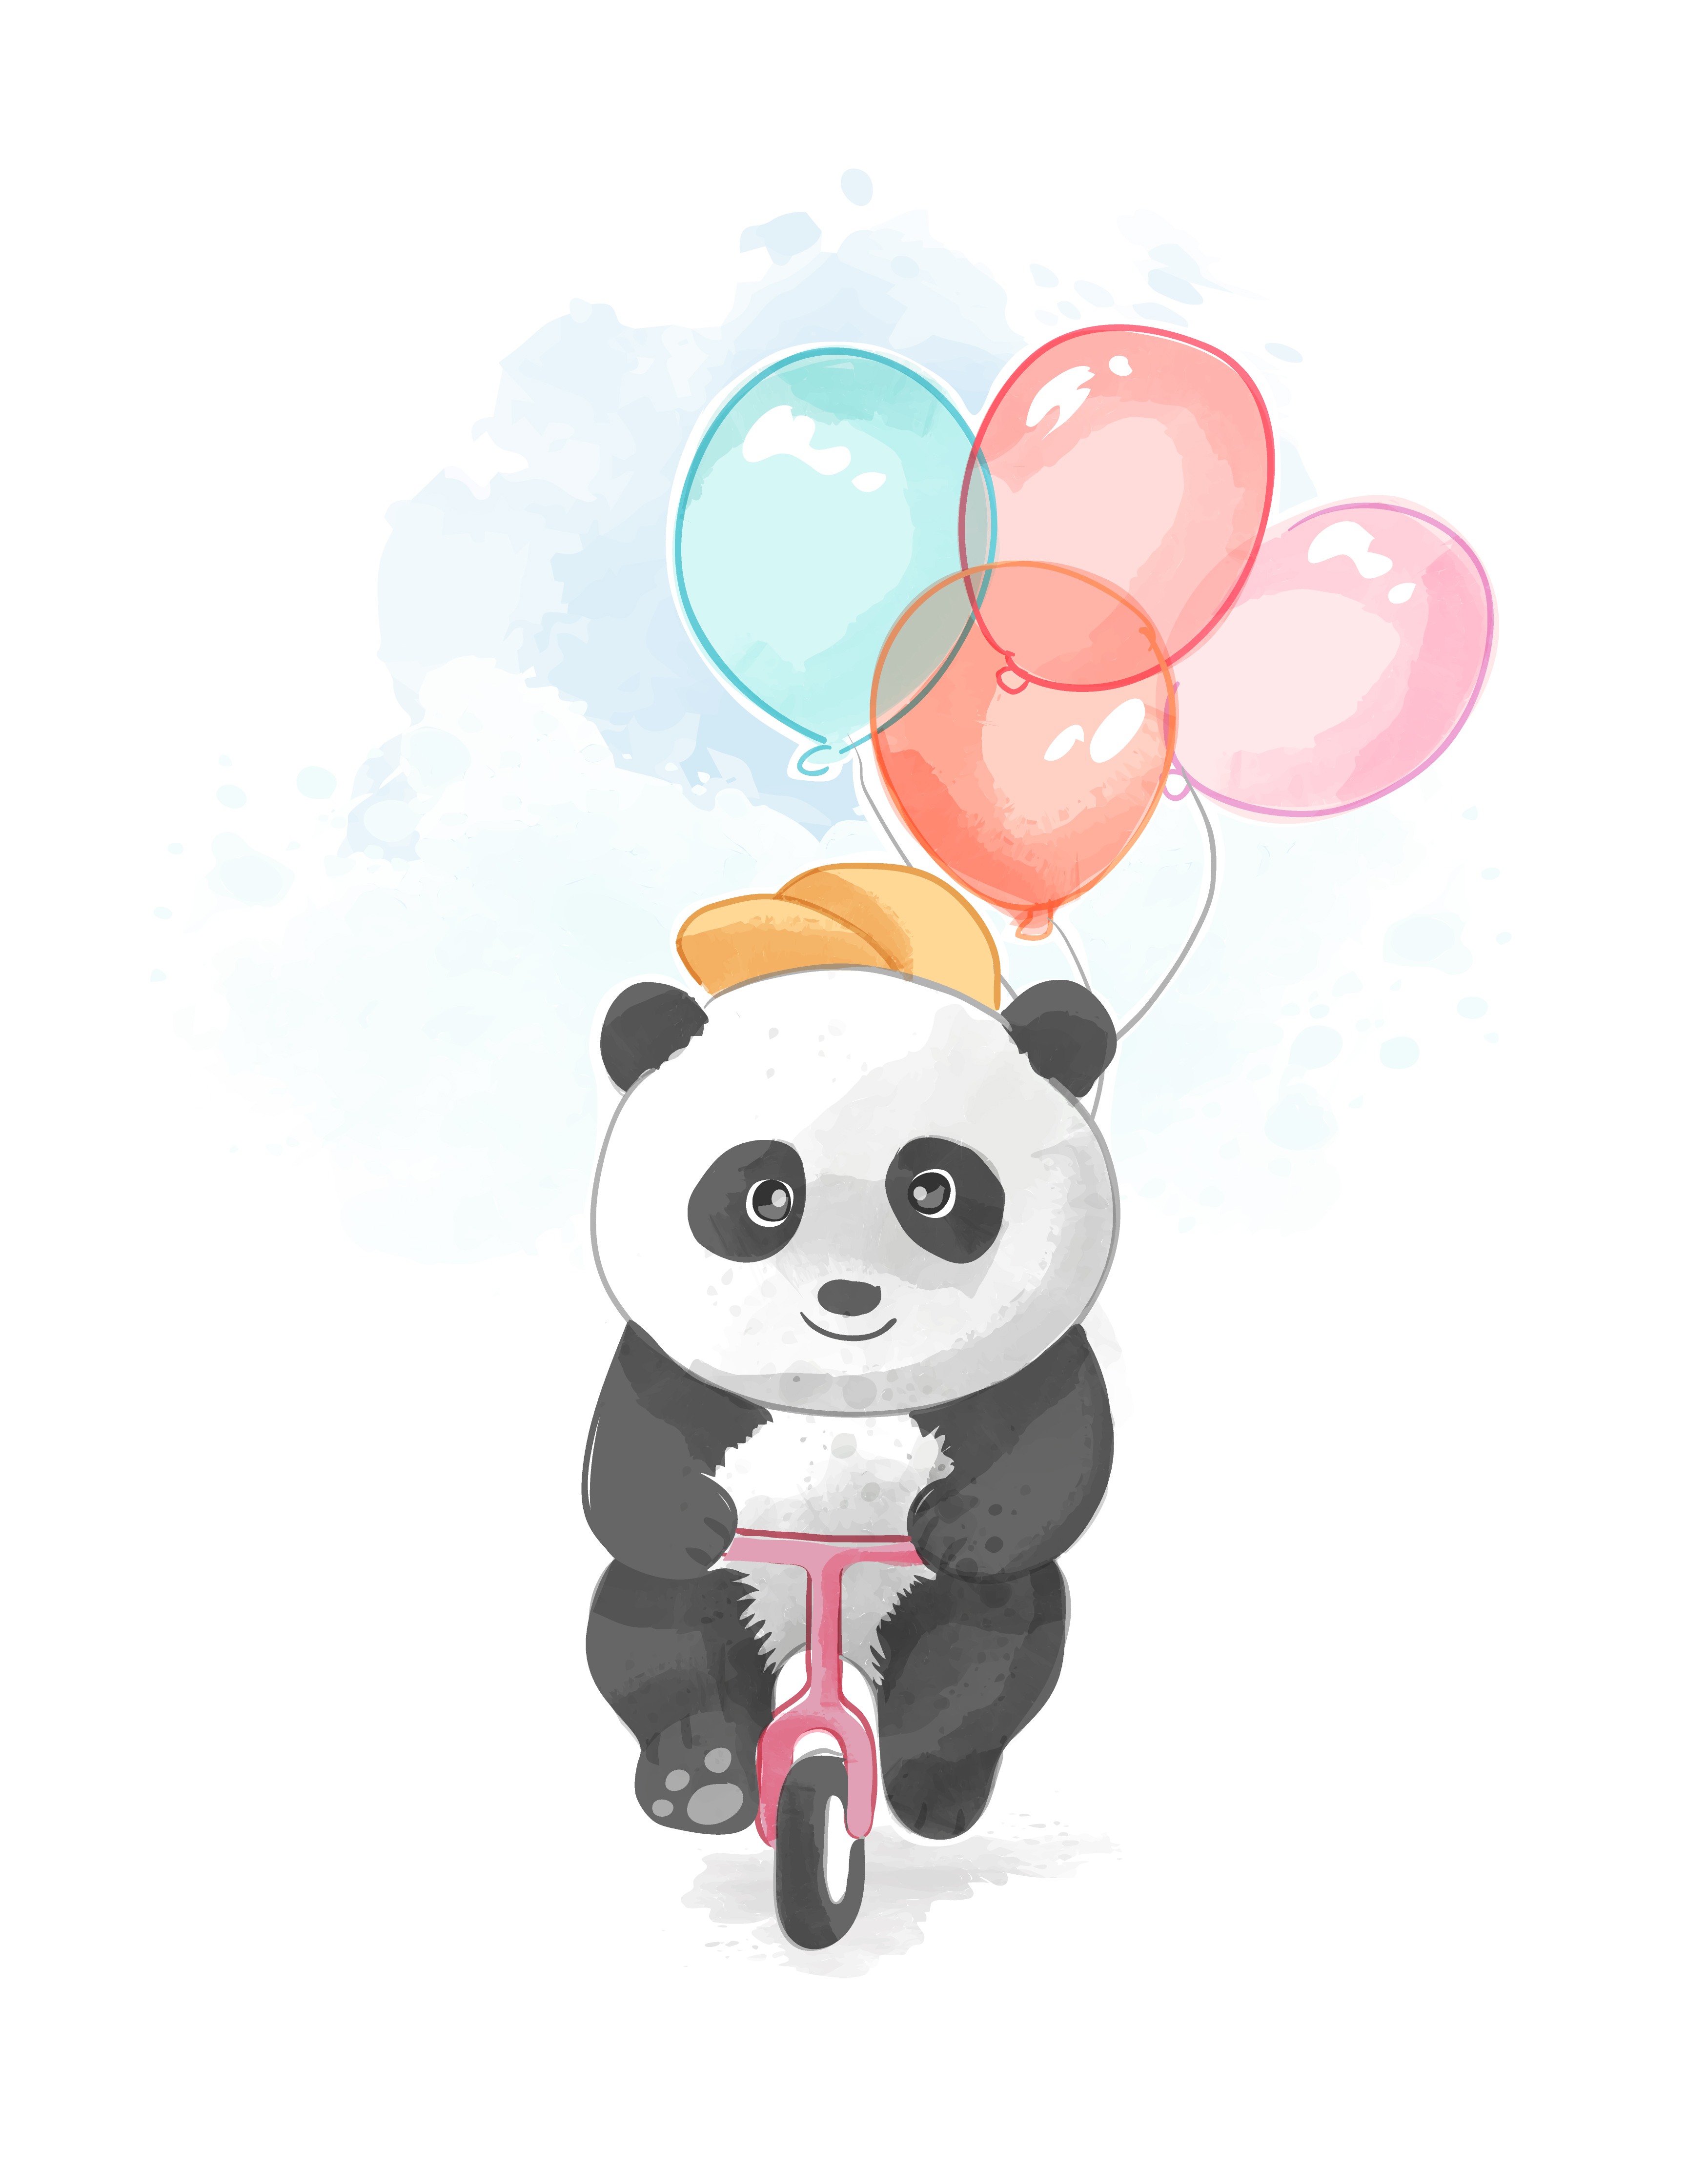 Cute Panda Riding Bicycle with Balloons 1229167 - Download Free Vectors